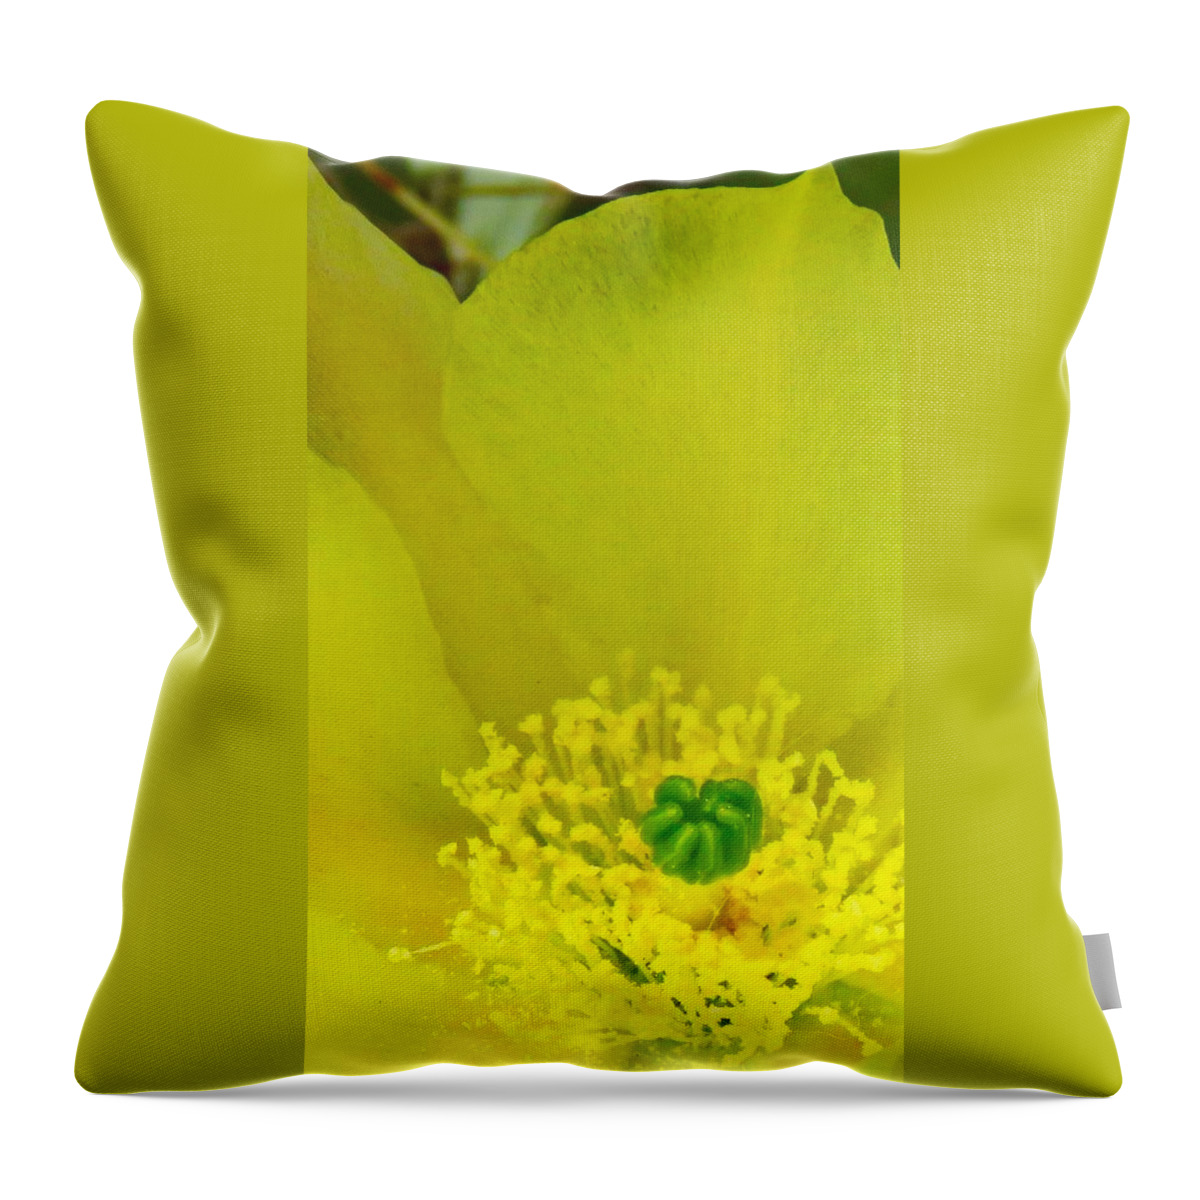  Arizona Throw Pillow featuring the photograph Yellow Bloom 1 - Prickly Pear Cactus by Judy Kennedy